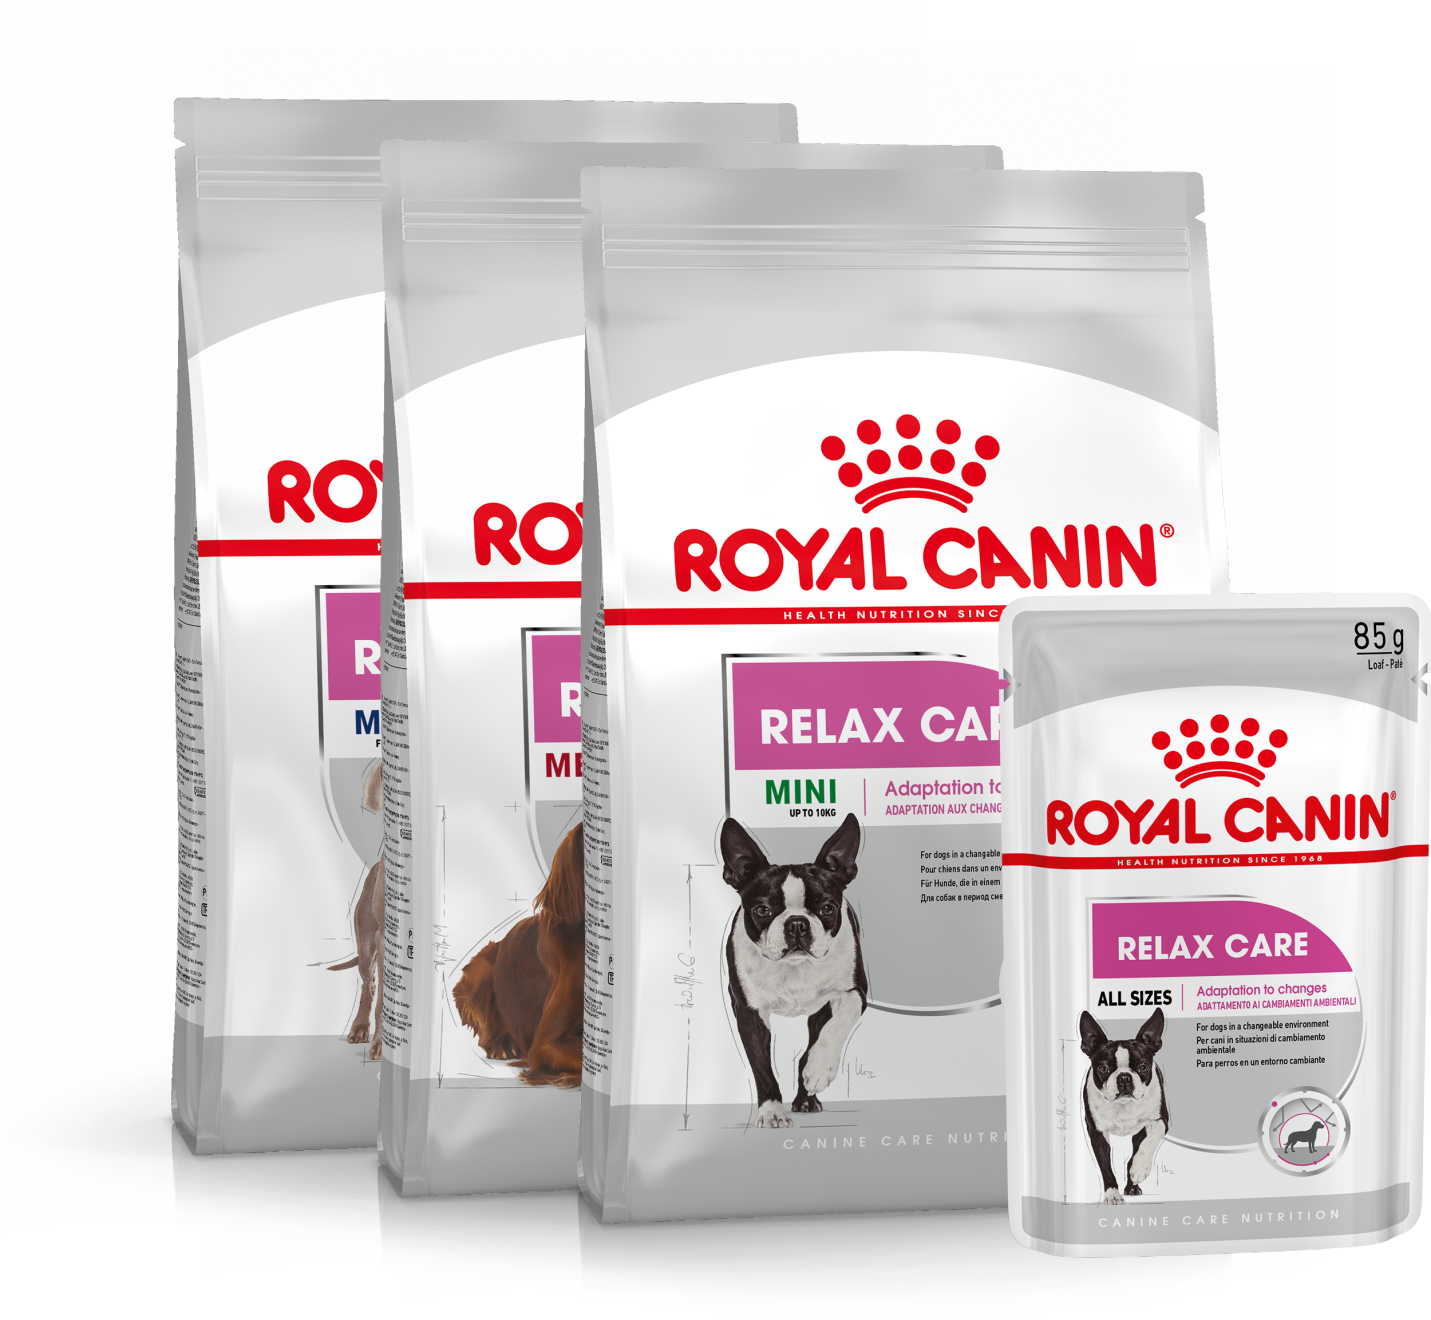 Royal Canin relax care nutrition